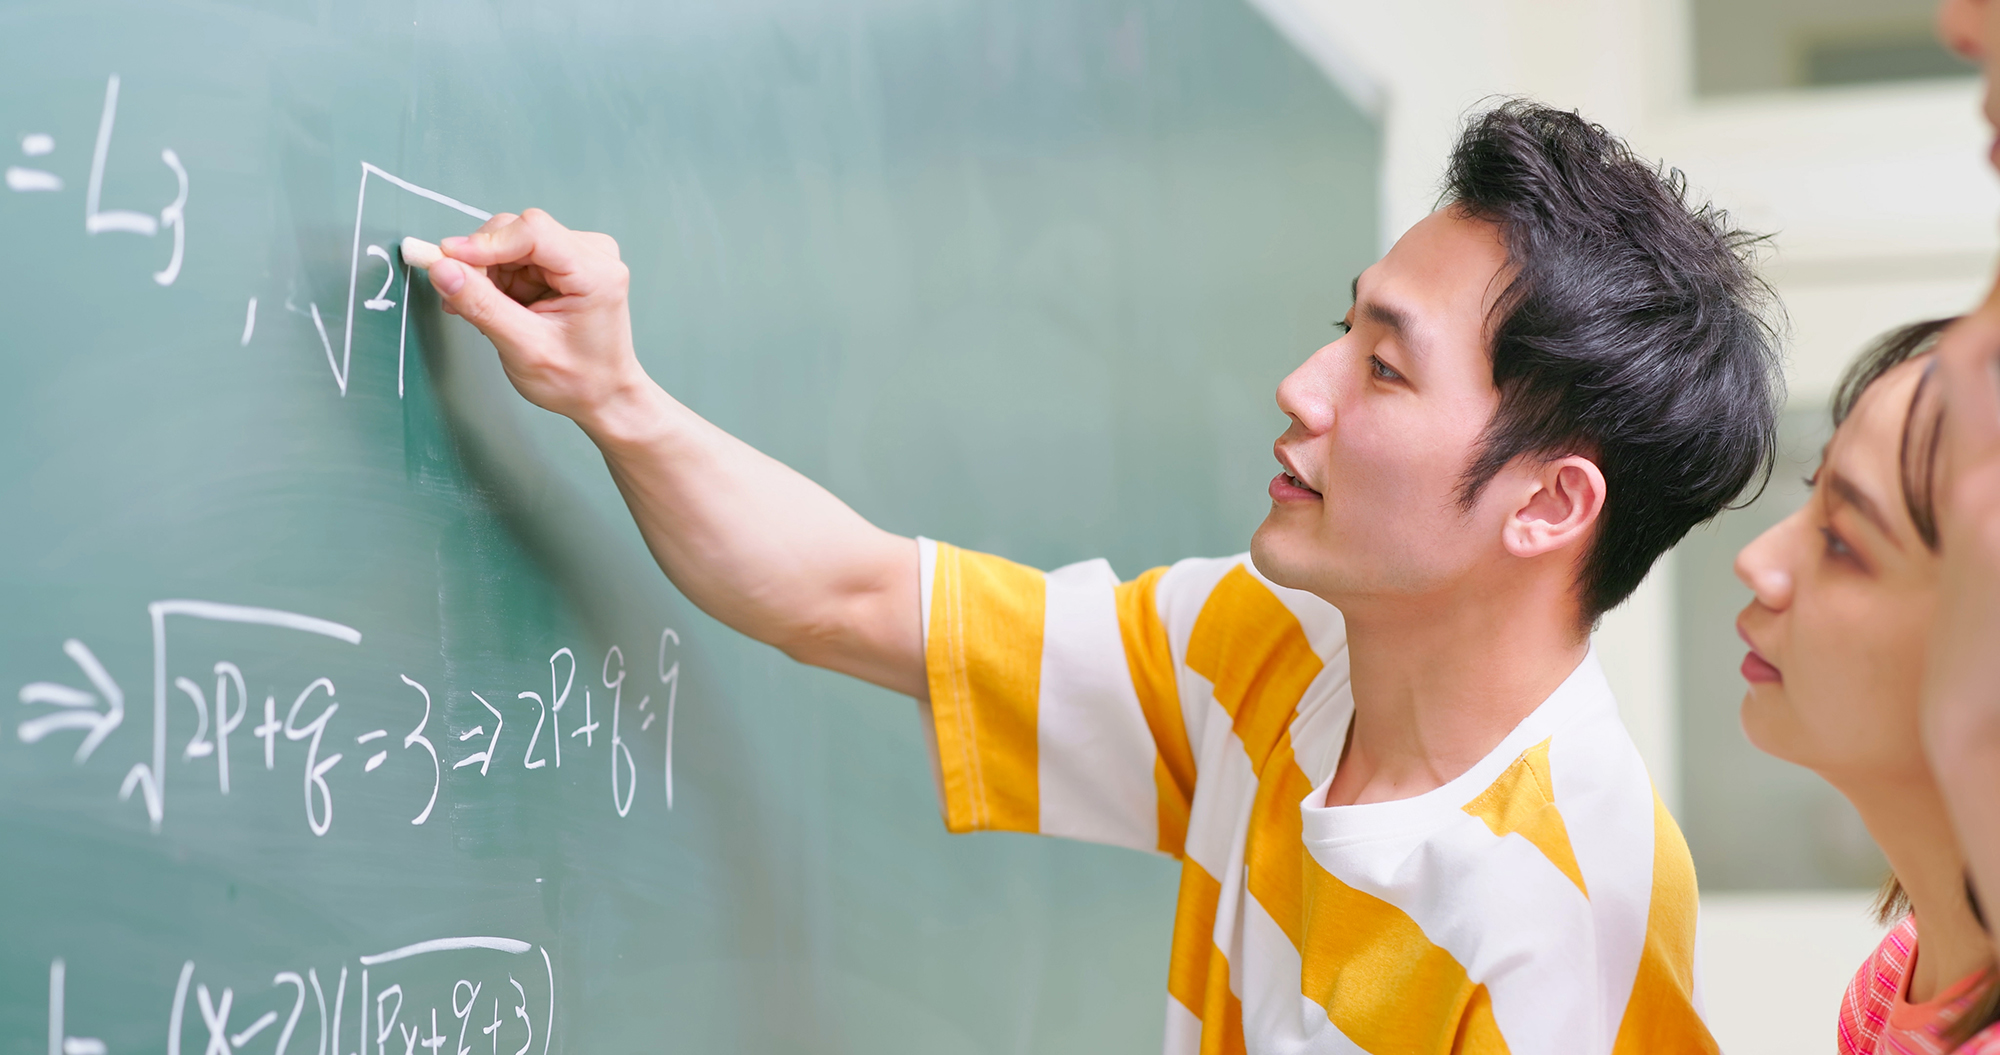 Image of student working math problems on a chalkboard